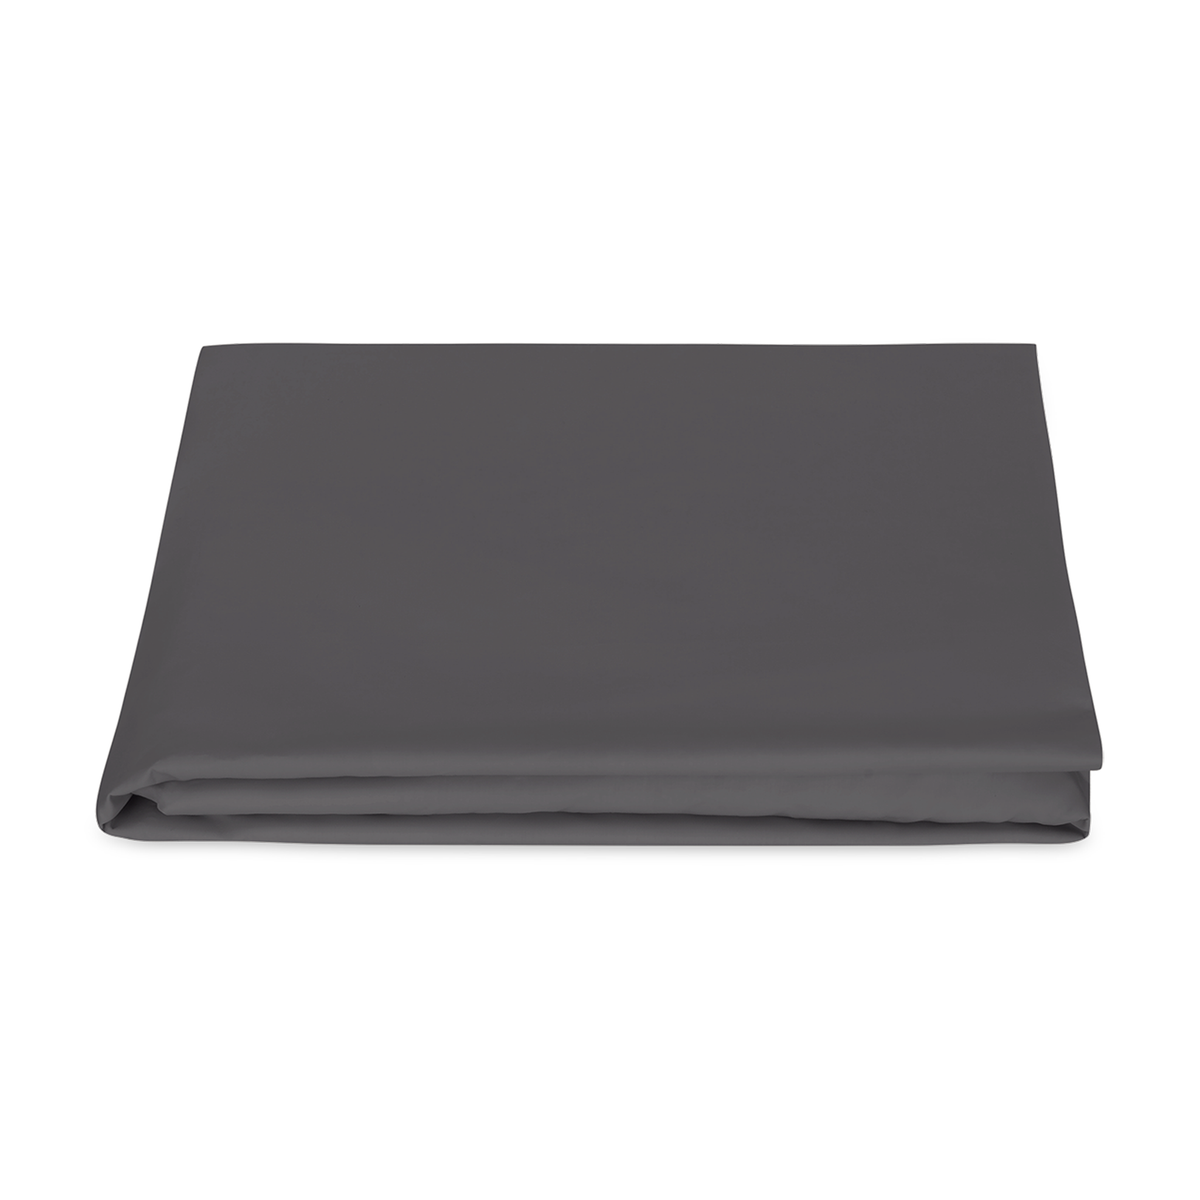 Folded Fitted Sheet of Matouk Milano Hemstitch Bedding in Color Carbon